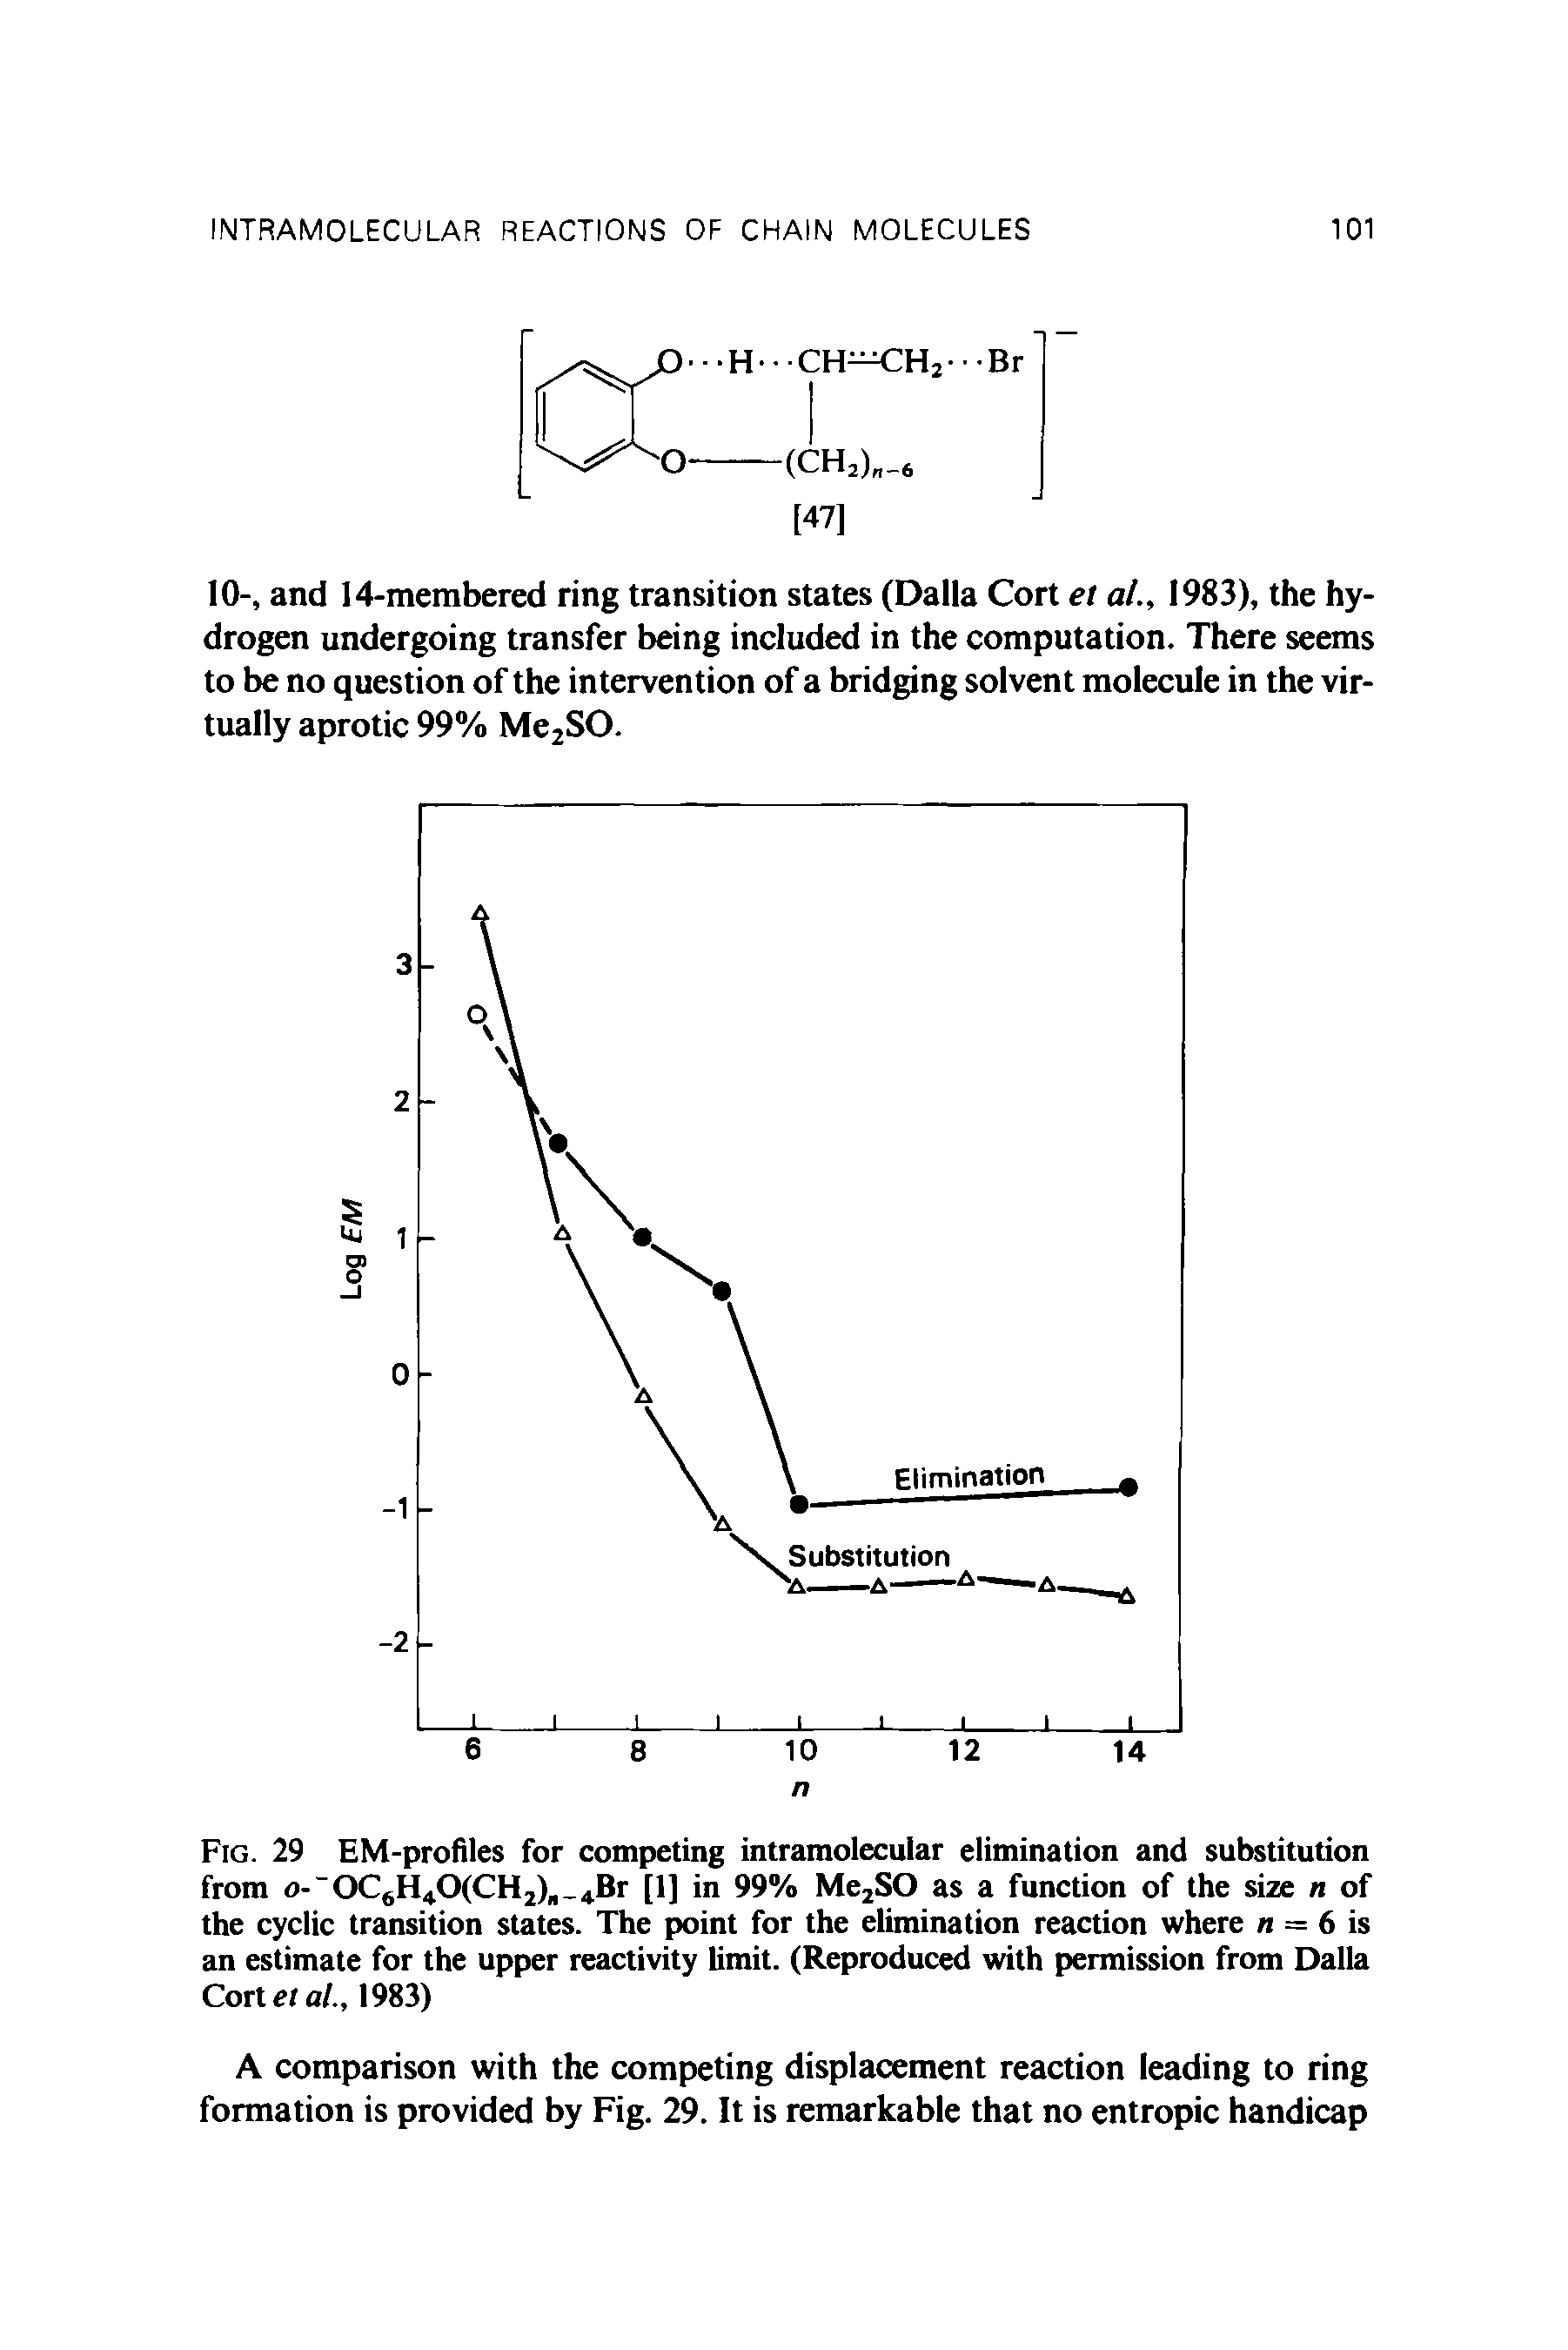 Fig. 29 EM-profiles for competing intramolecular elimination and substitution from o- 0C6H40(CH2) 4Br [1] in 99% Me2SO as a function of the size n of the cyclic transition states. The point for the elimination reaction where n = 6 is an estimate for the upper reactivity limit. (Reproduced with permission from Dalla Corte/ al., 1983)...